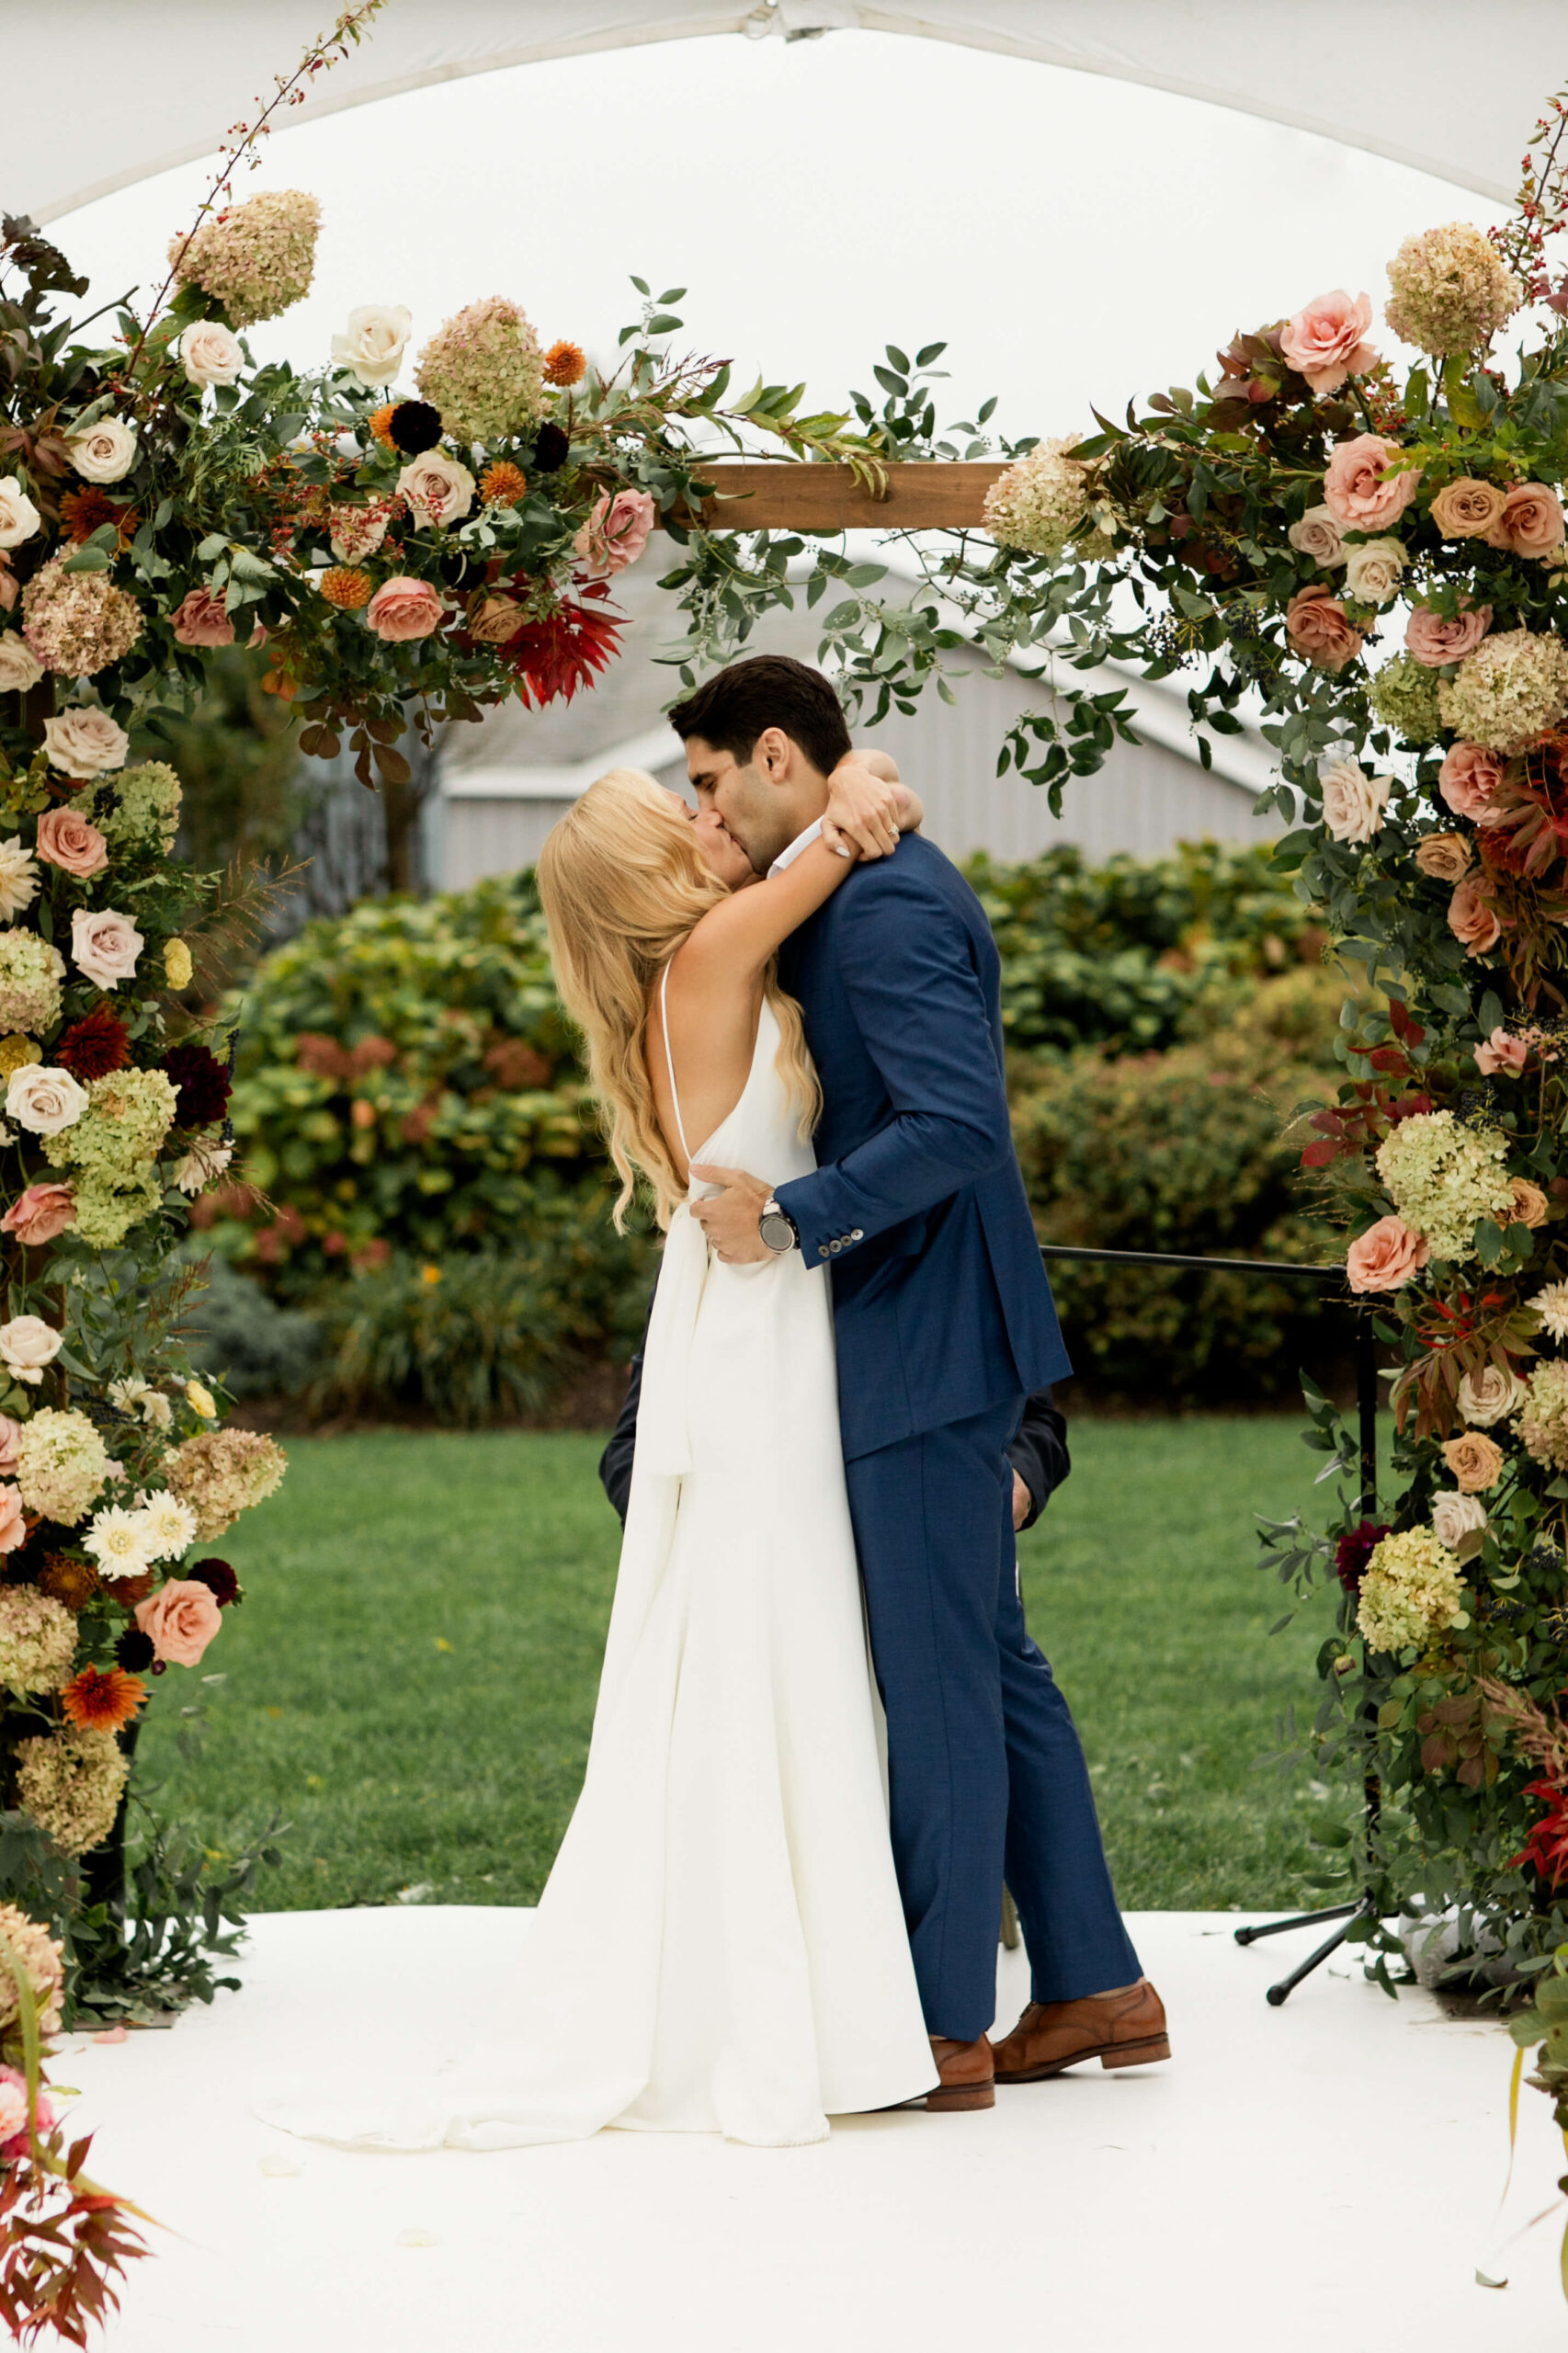 Bride and groom kissing underneath floral arch